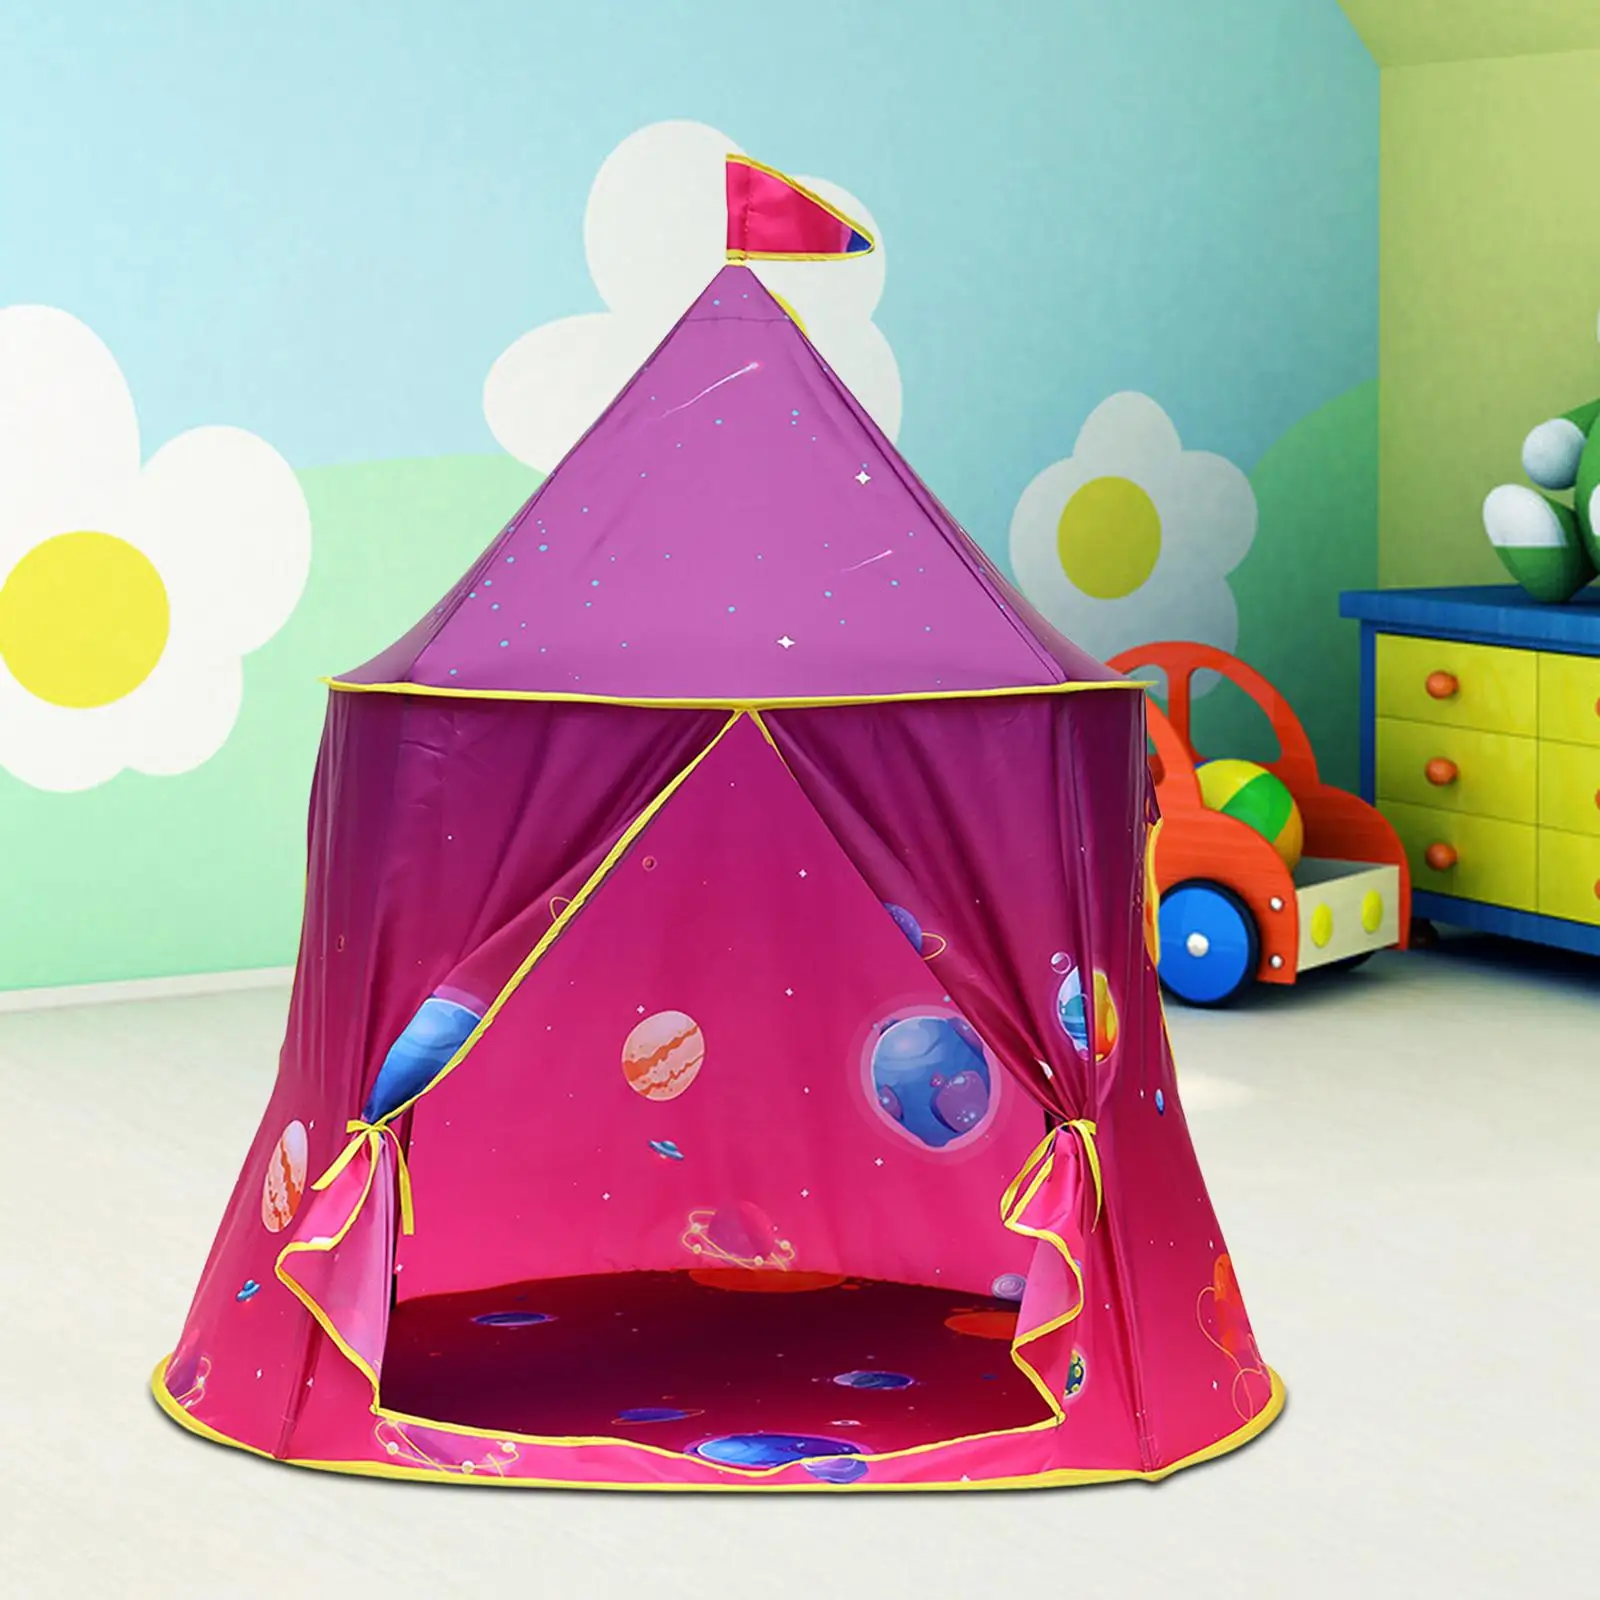 Space Themed Children Play Tent Kids Play House Spaceship Tent Playhouse Tent Foldable Castle for Camping Indoor Kids Gifts